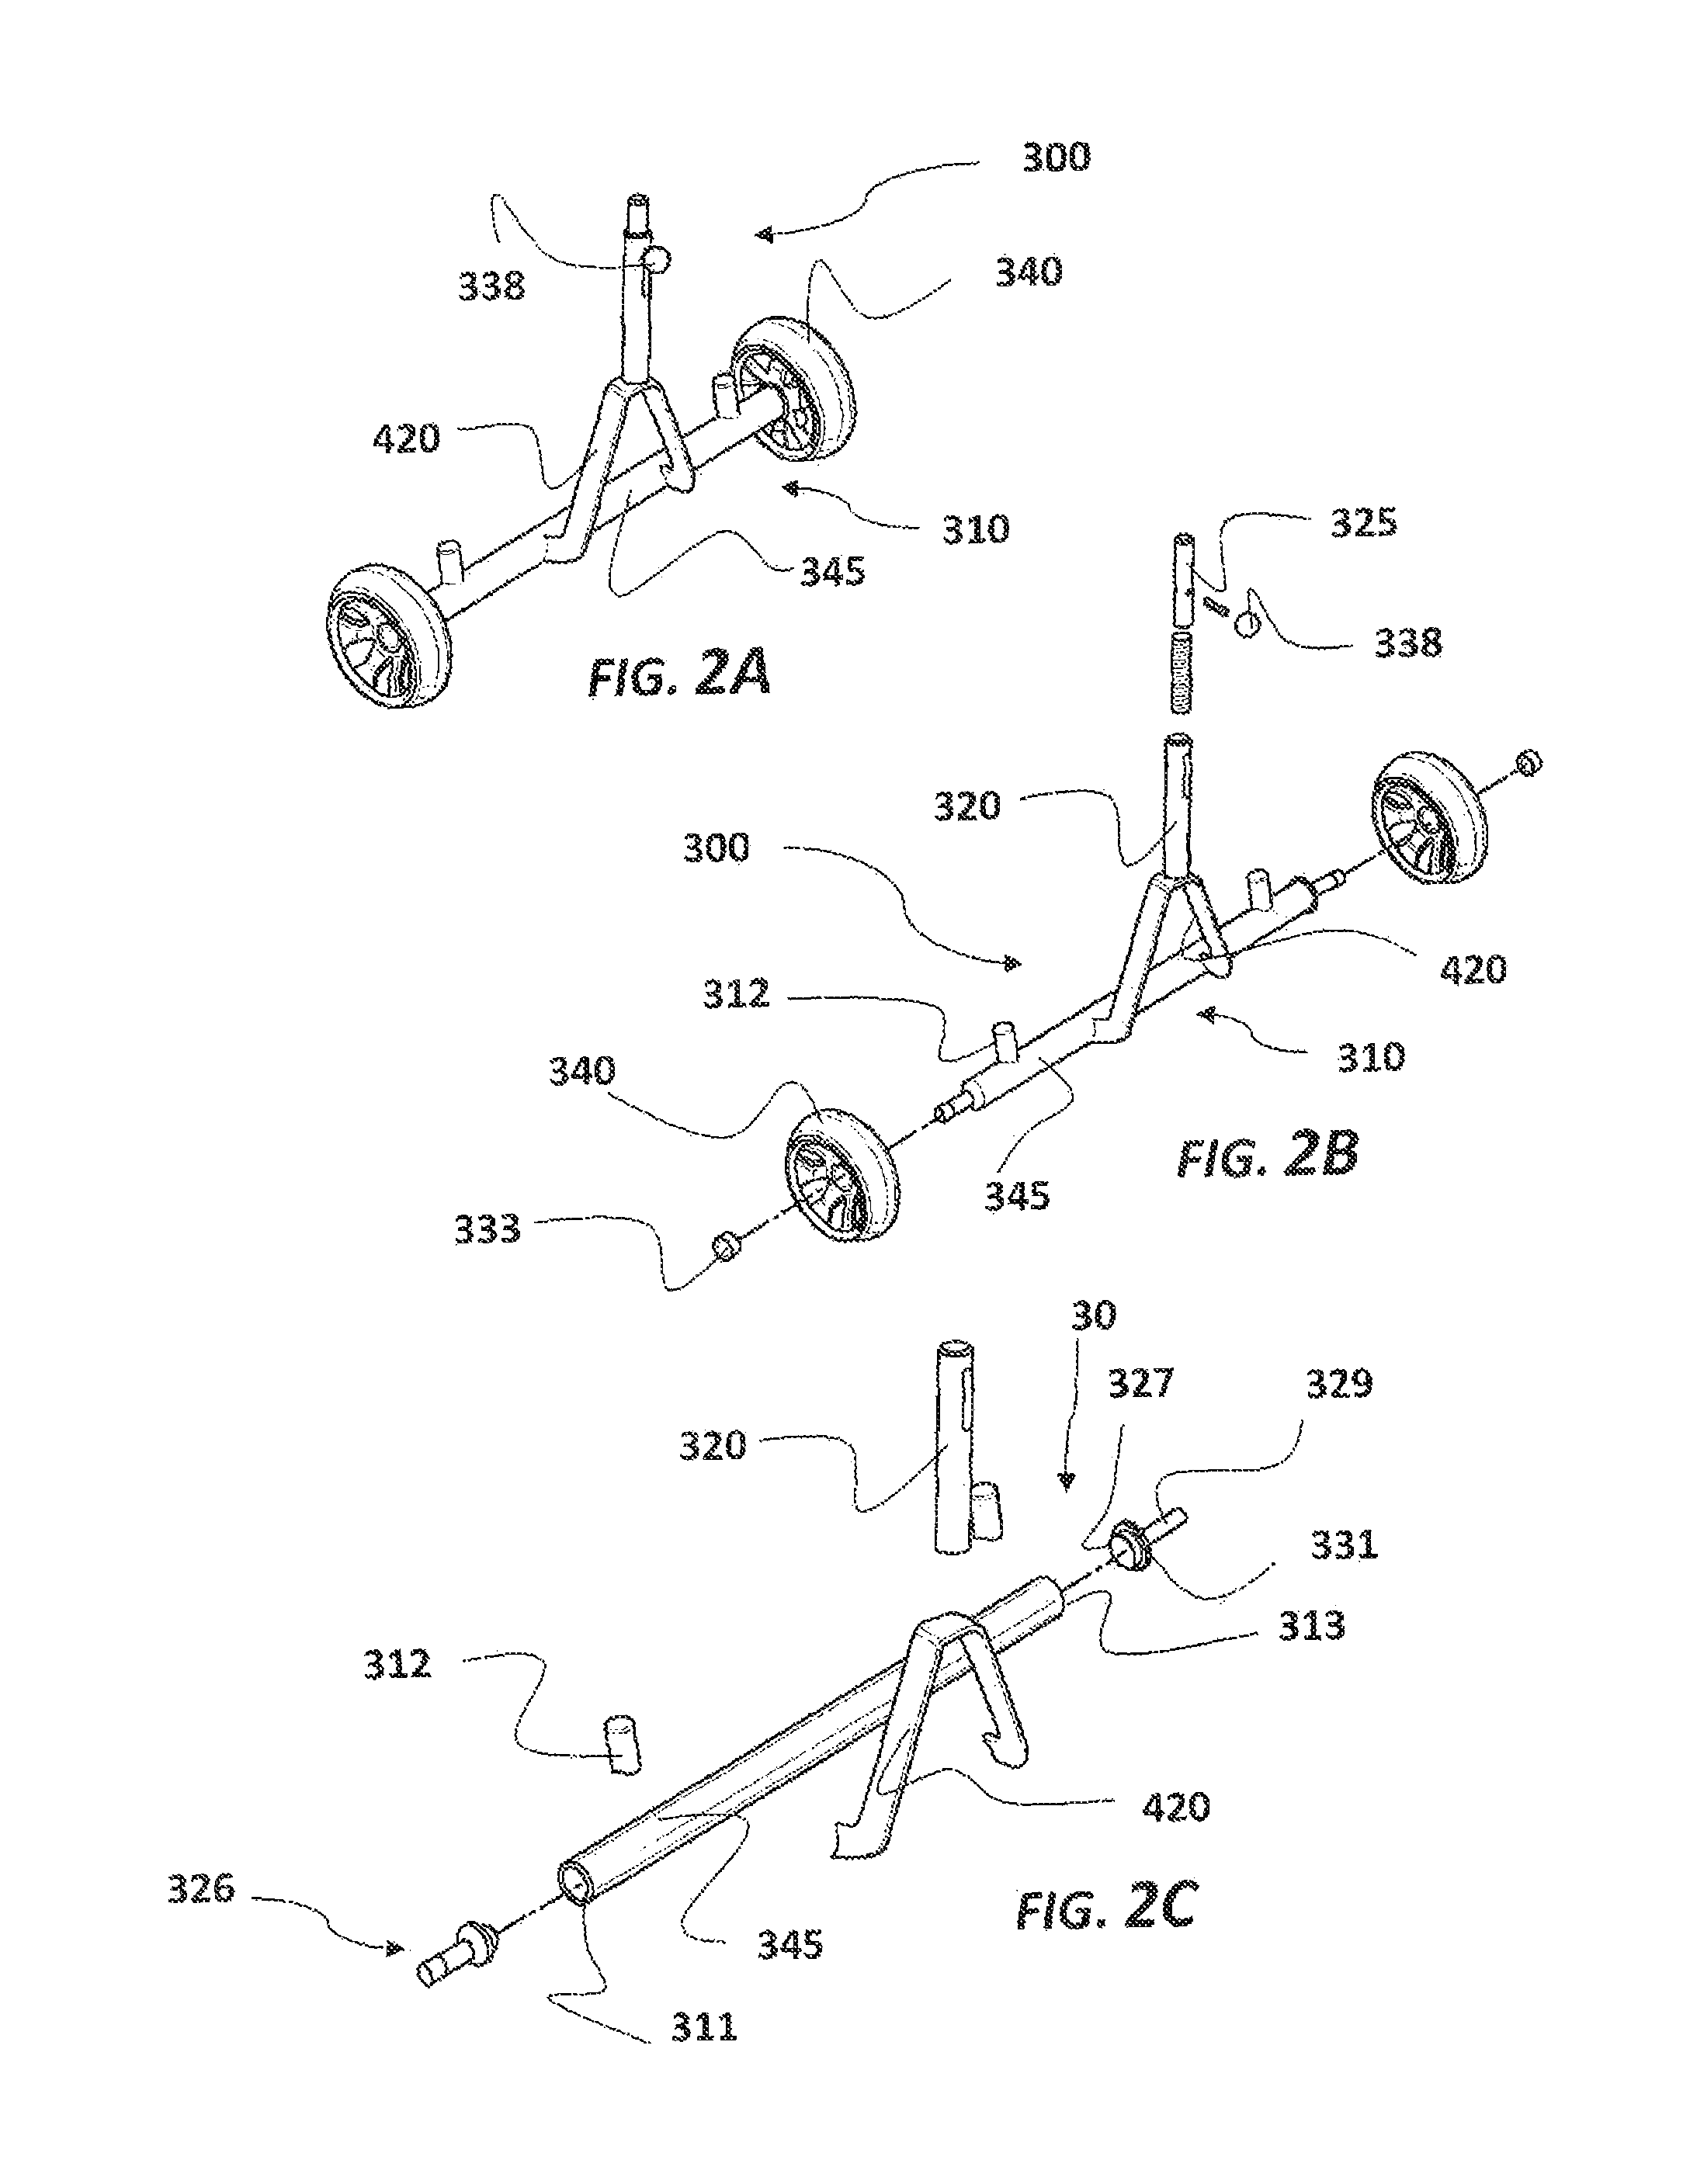 External frame system and method for mounting